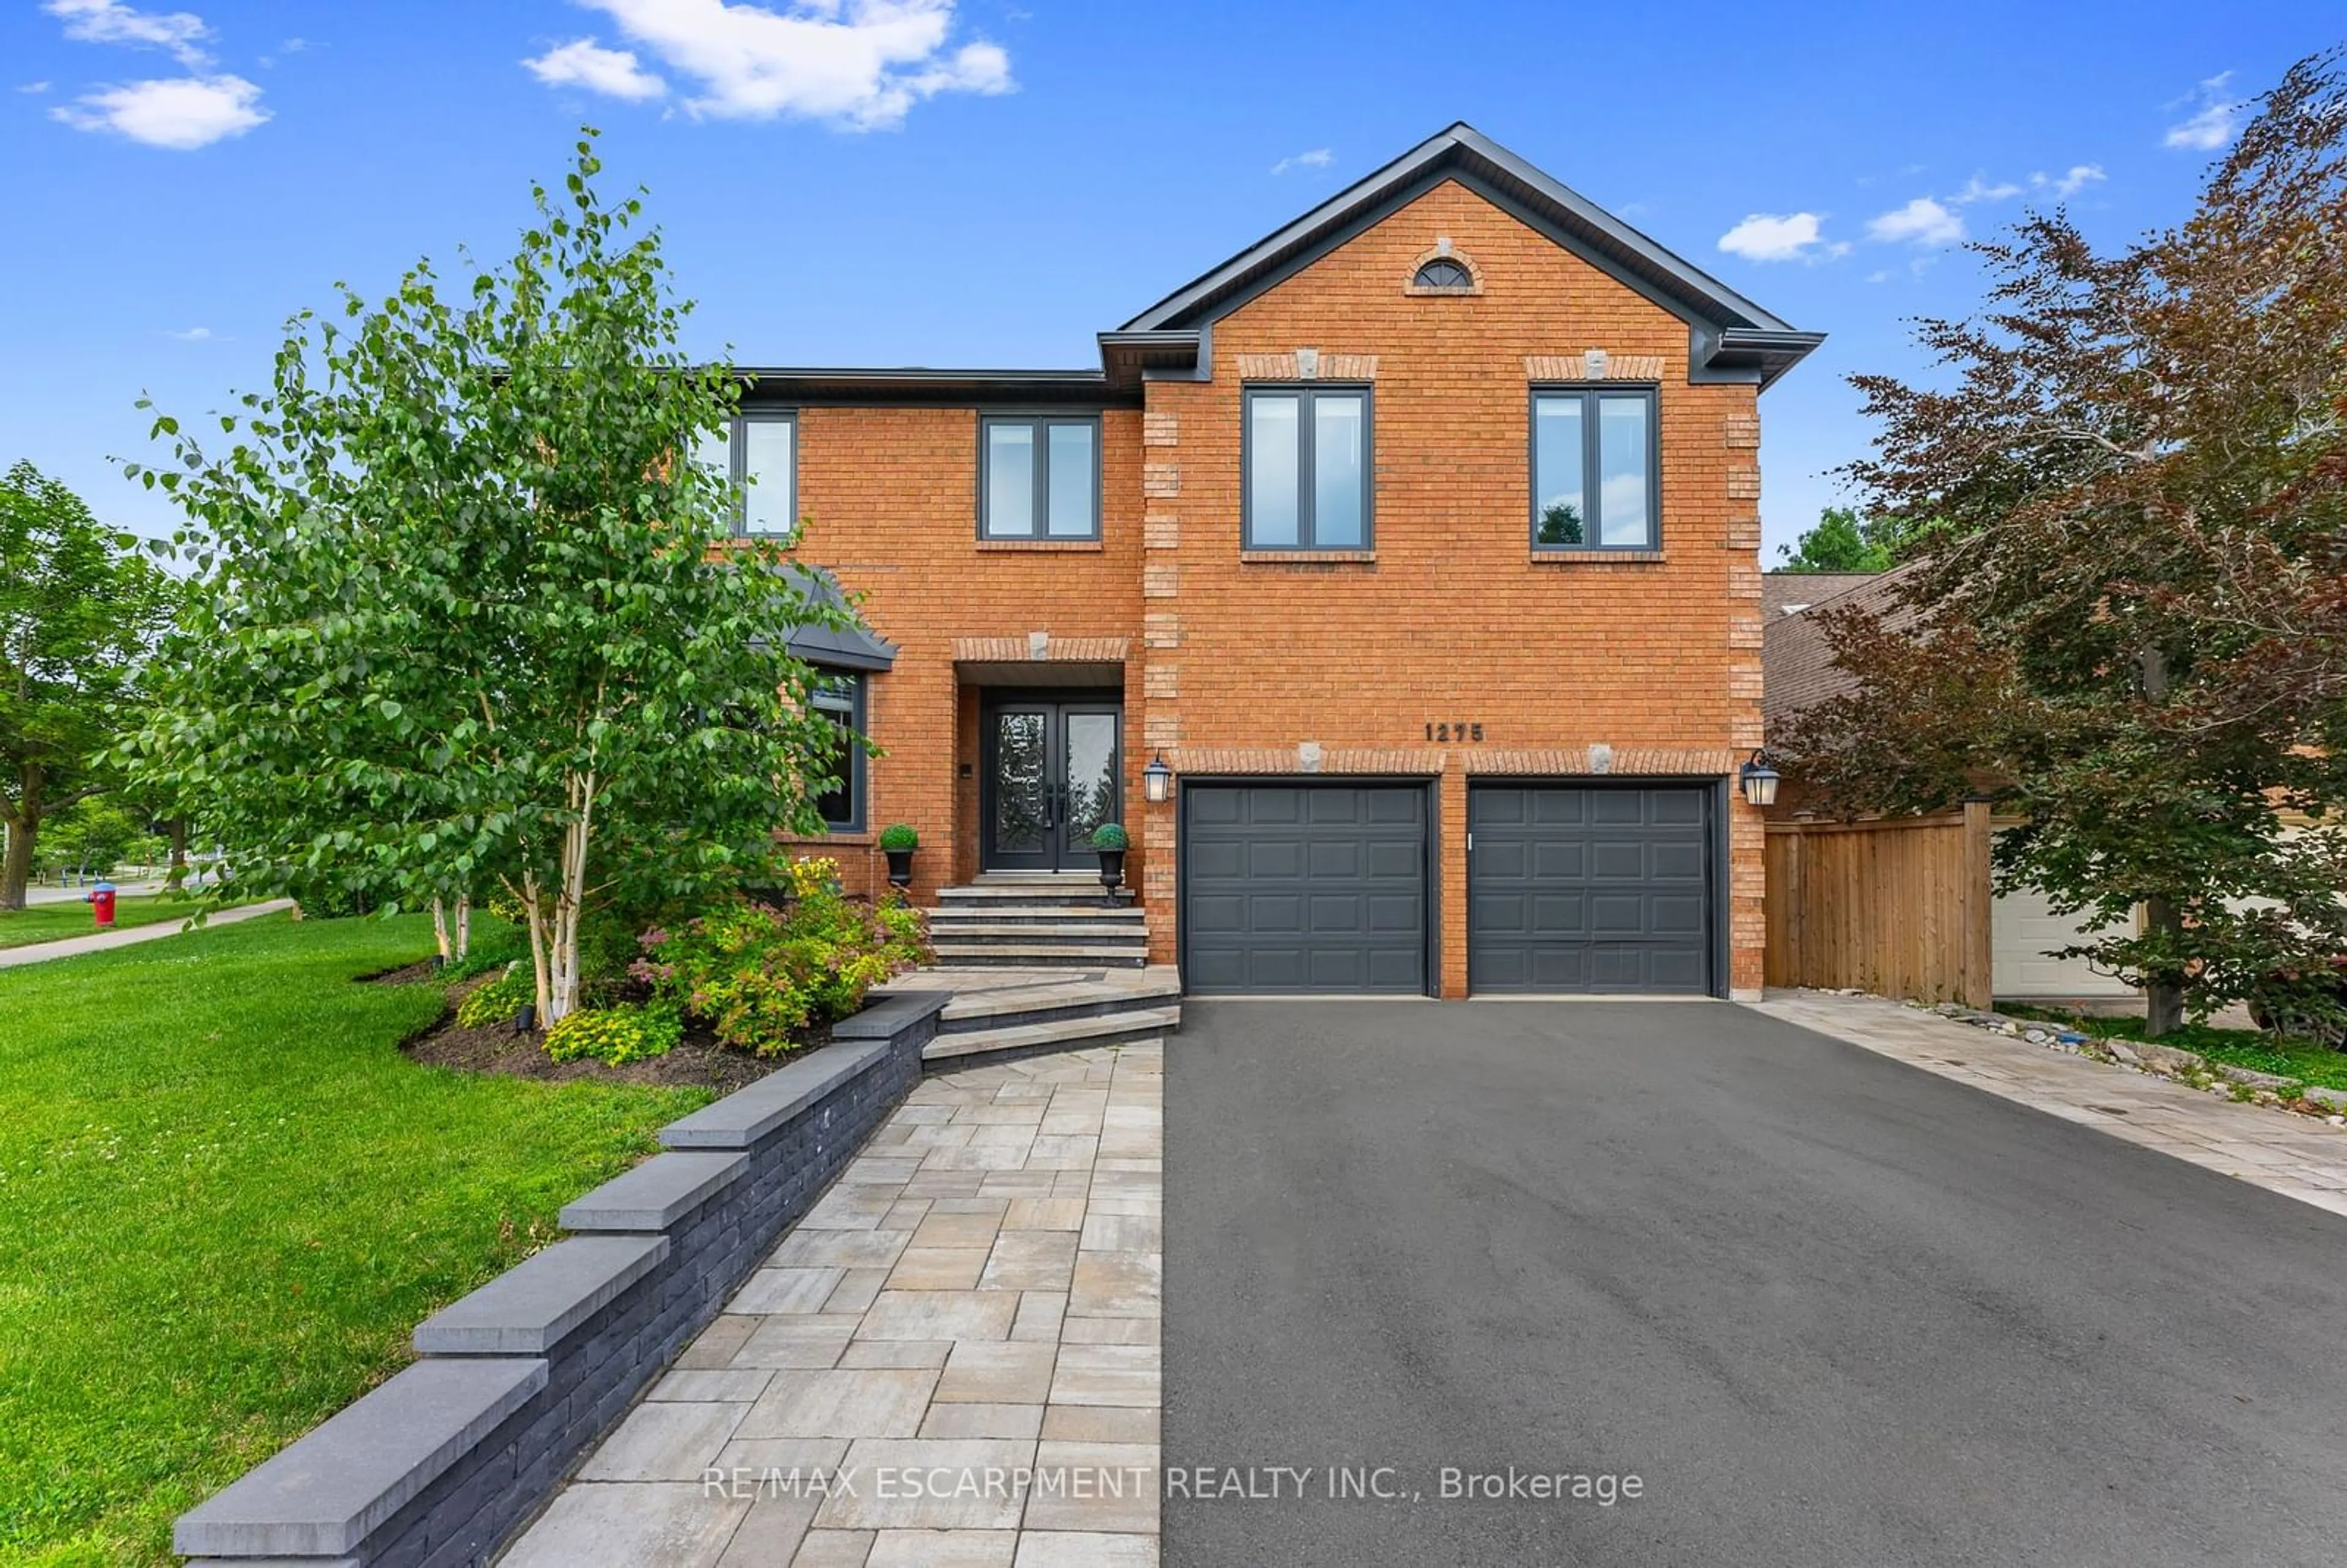 Home with brick exterior material for 1275 White Lane, Oakville Ontario L6M 2T7